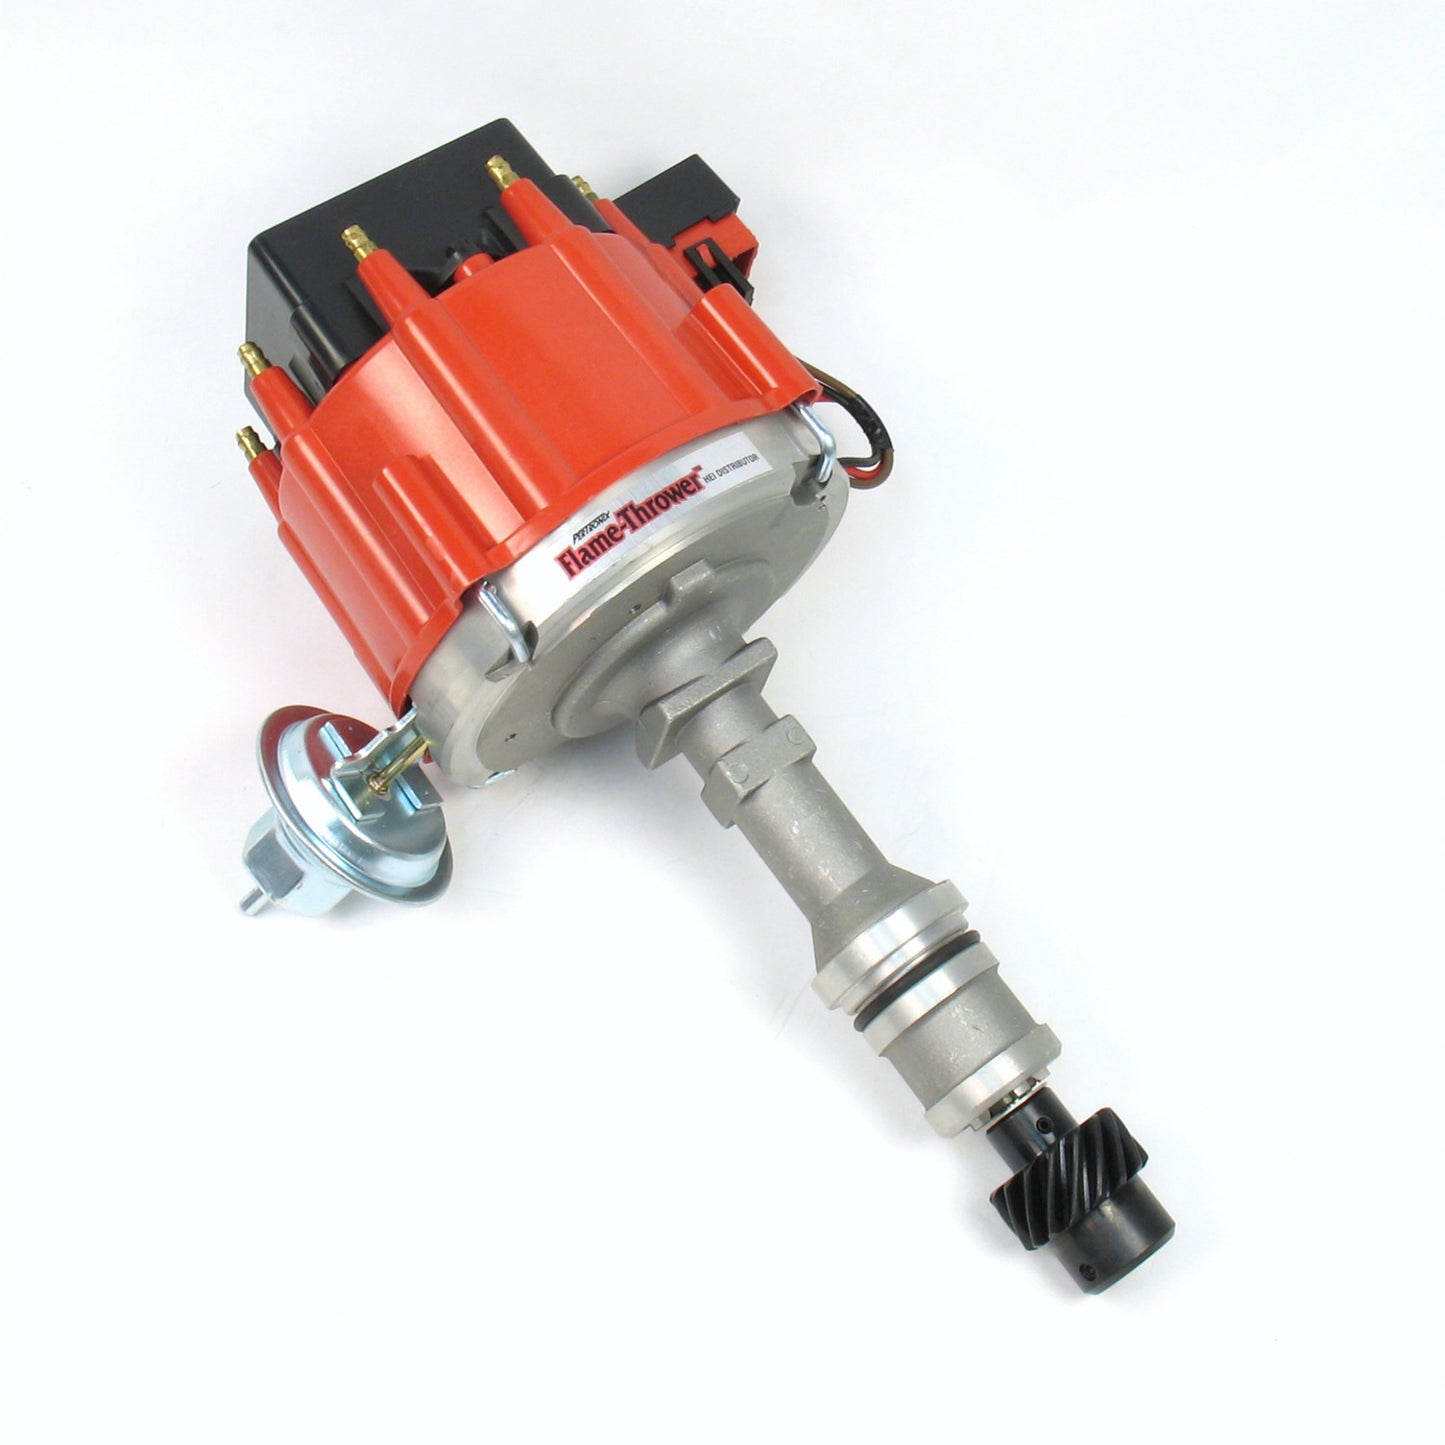 PerTronix D71101 Flame-Thrower Distributor HEI III Oldsmobile 260-455 Red Cap with multiple sparks and an adjustable rev limiter